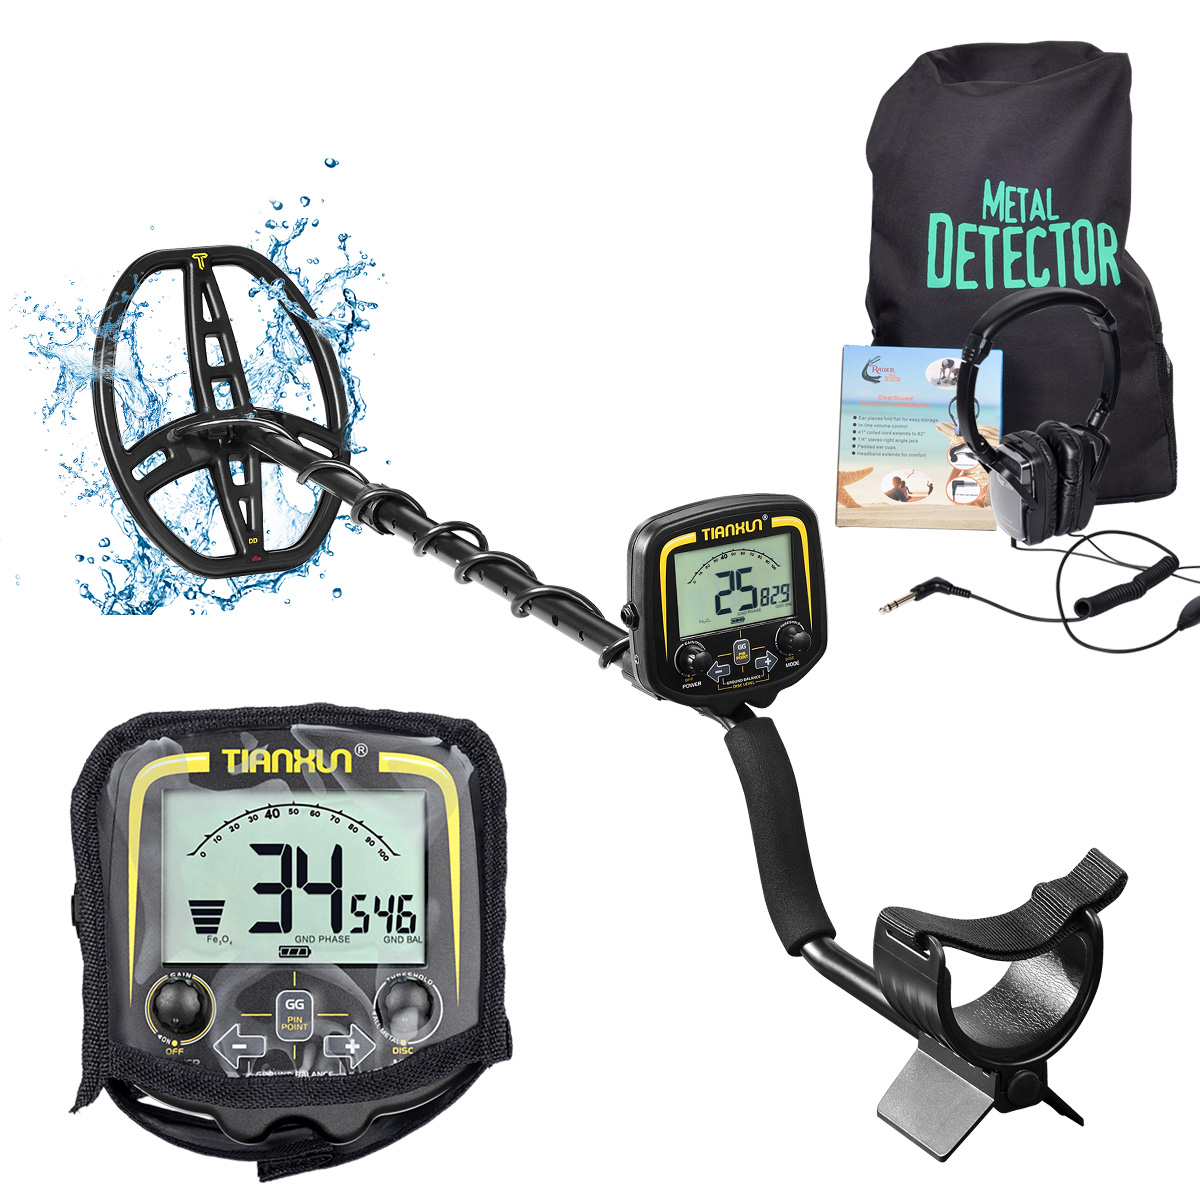 Professional Lightweight Metal Detector, with 11 Inch Waterproof Coil & Headphone, Max 1.5m Depth Detection Outdoors